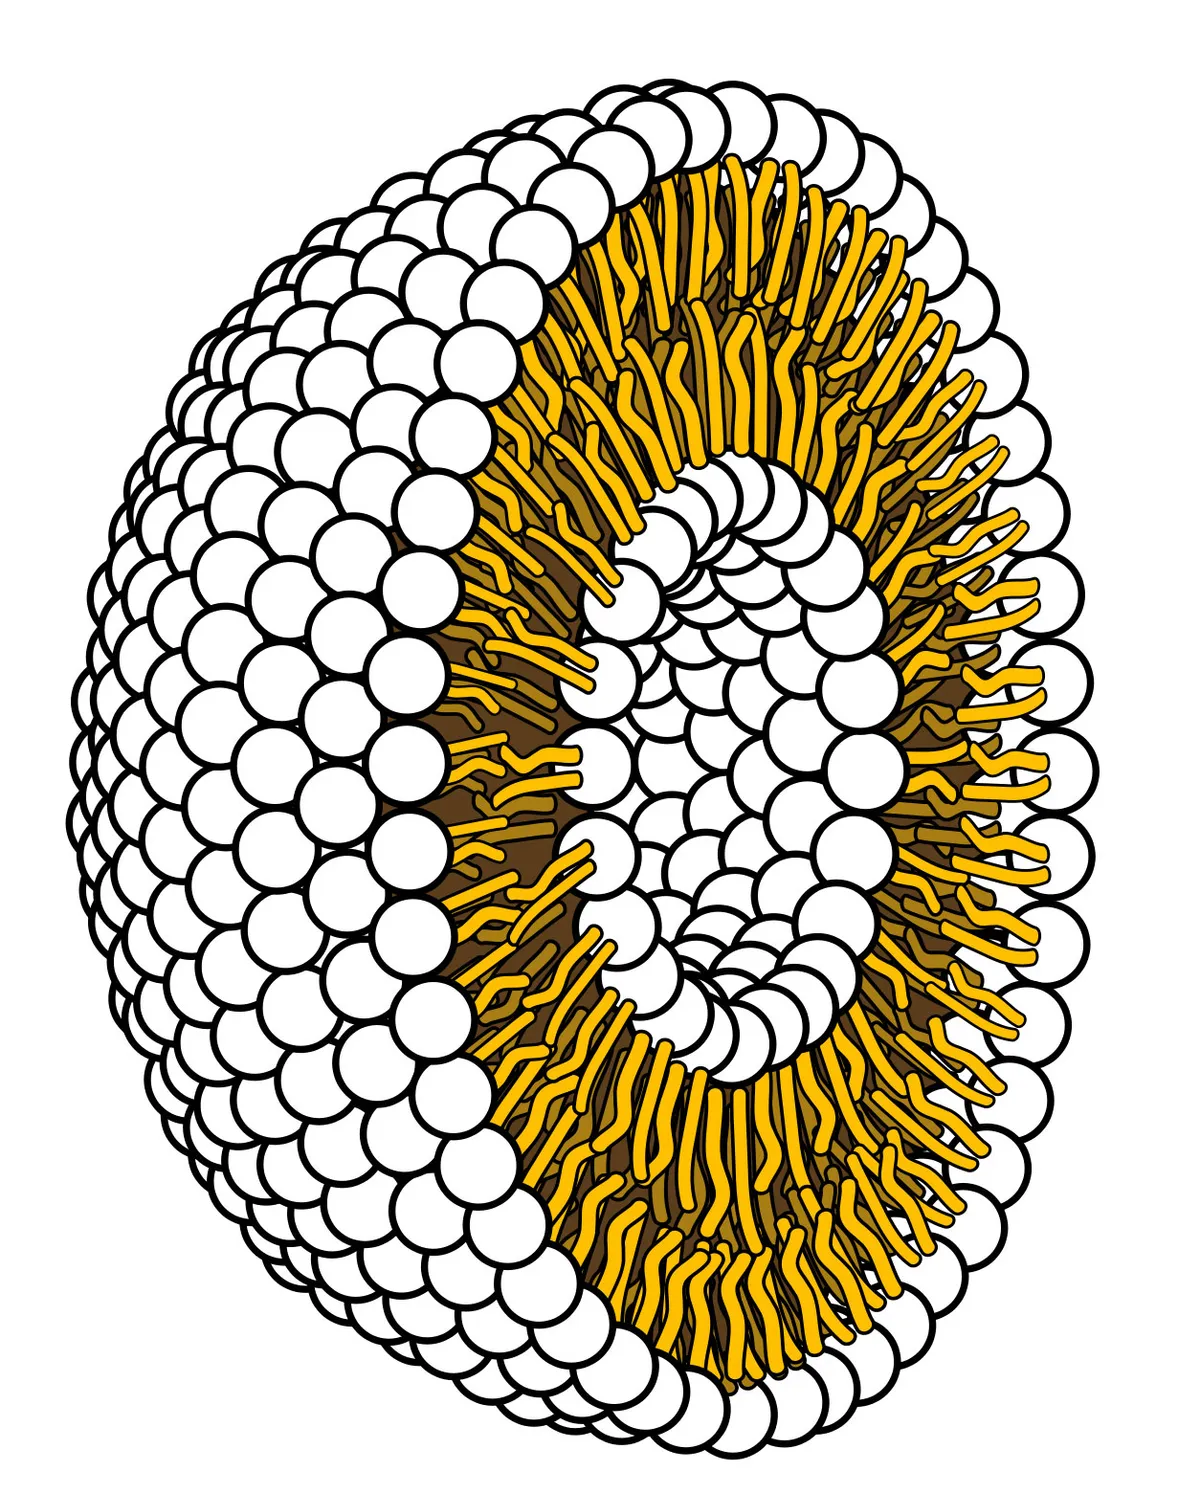 A lipid bilayer with the round, hydrophilic heads pointing outwards and the hydrophobic tails pointing inwards © LadyofHats / Public domain